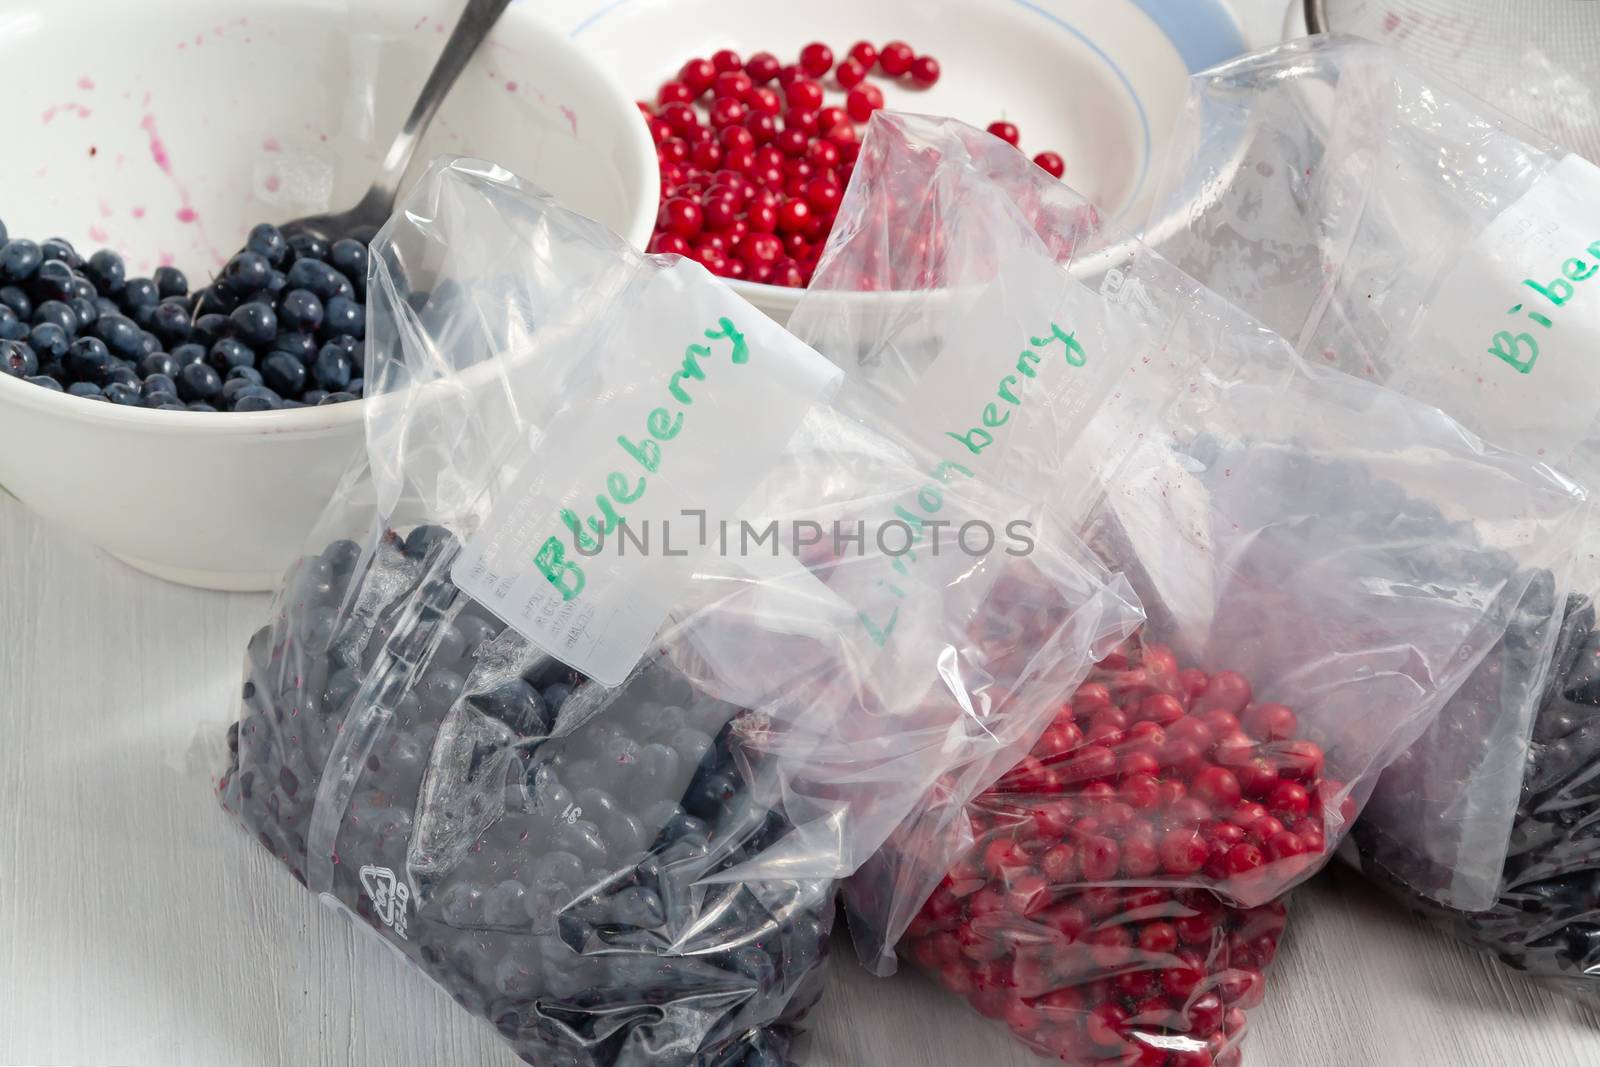 Berries laid out on a bags and prepared for freezing and storage by galsand